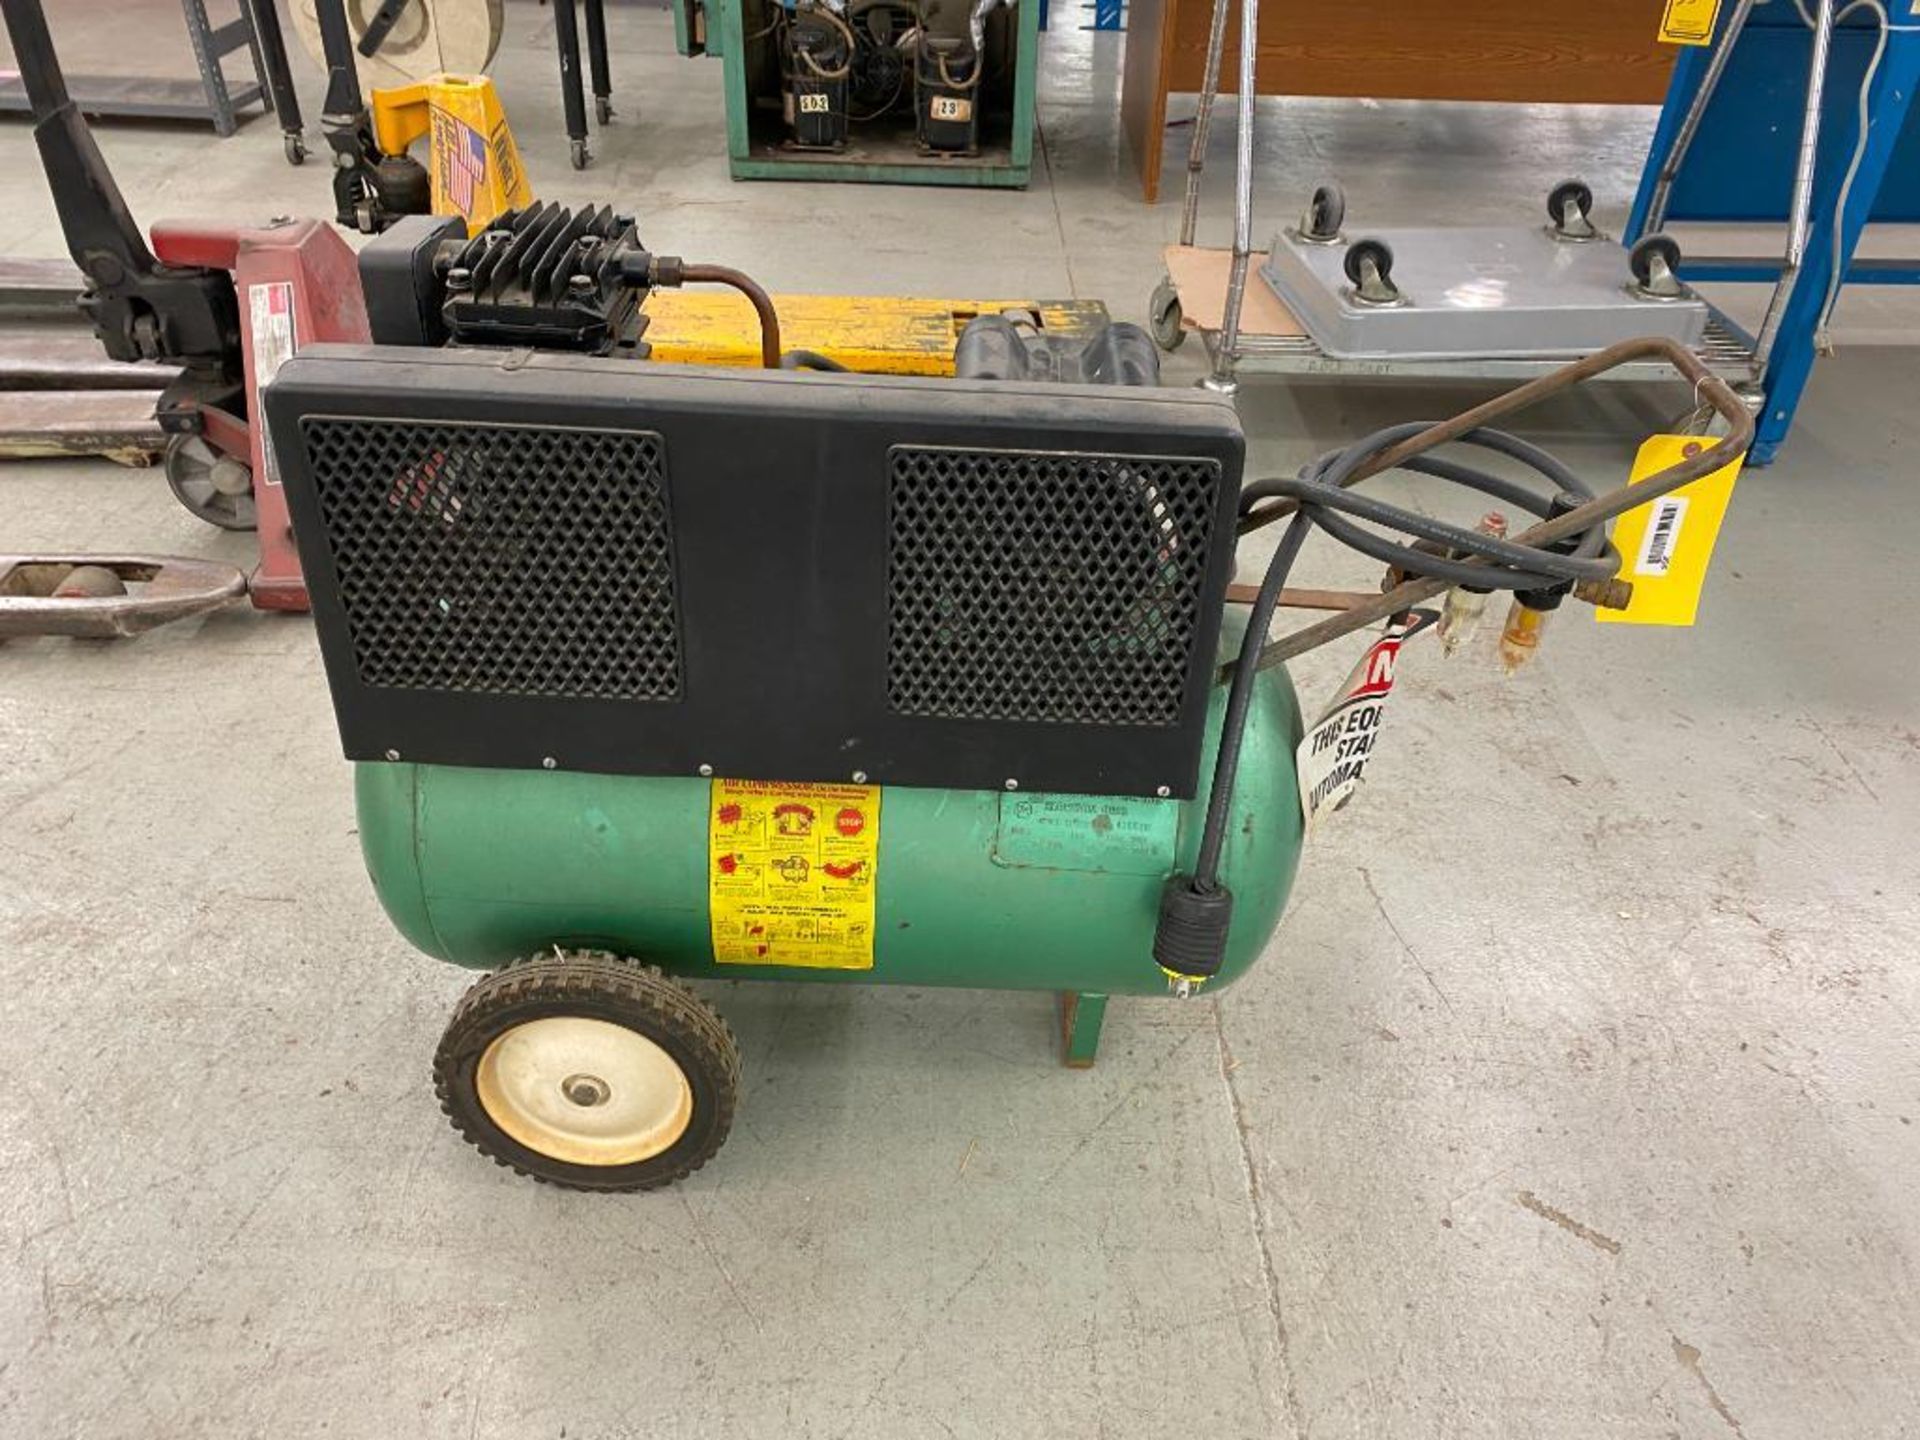 Sears 150 PSI Twin-Cylinder Air Compressor, 2 HP, Model 106.153784 - Image 2 of 3